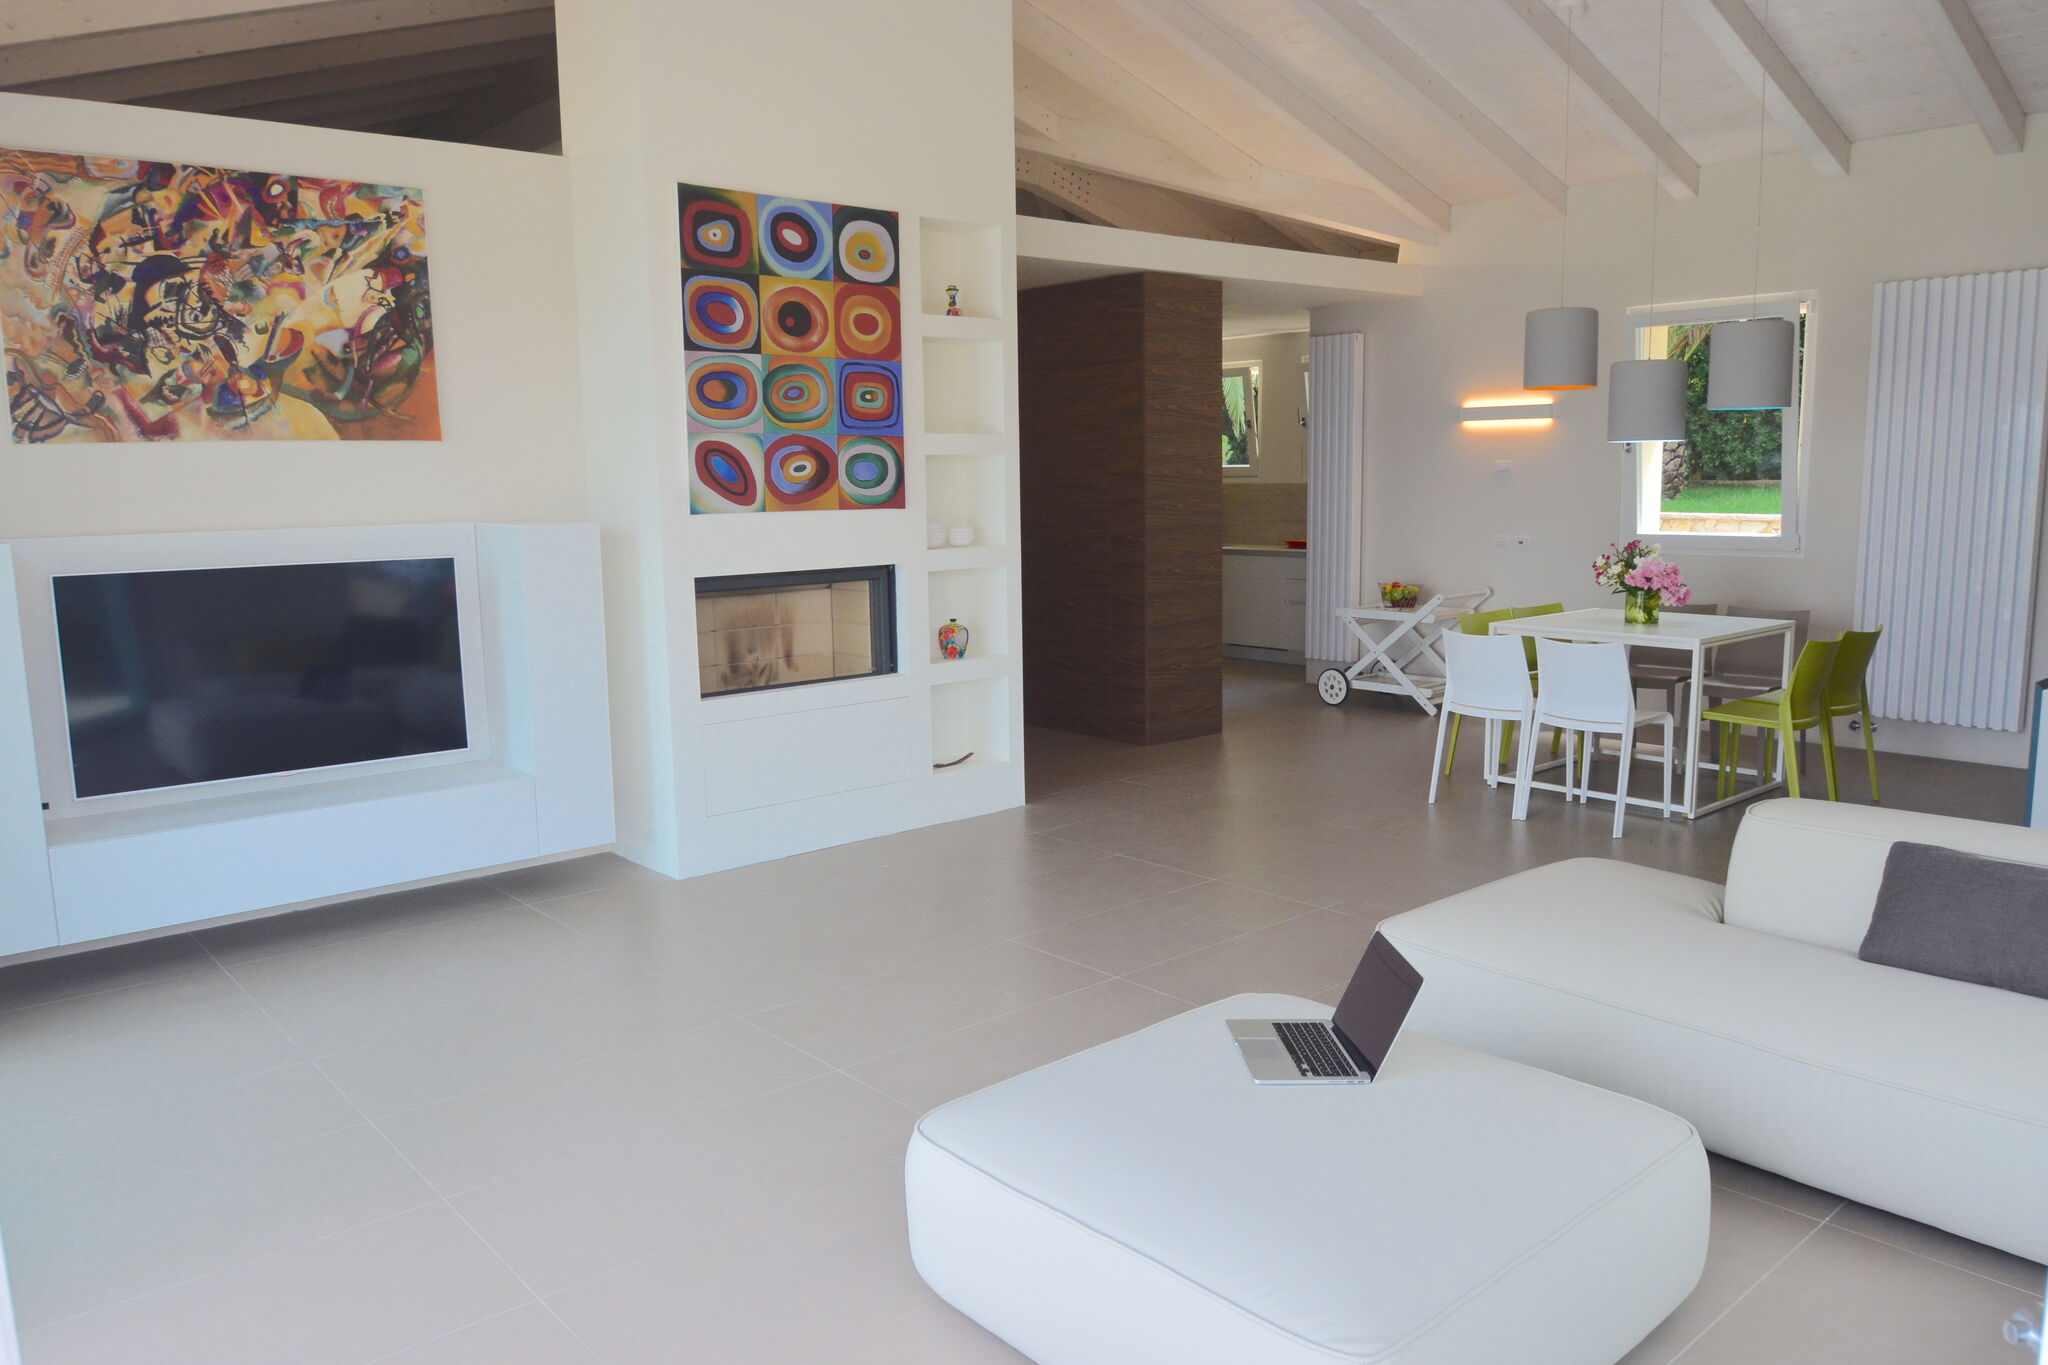 Modern Villa with Pool in Capoliveri Italy